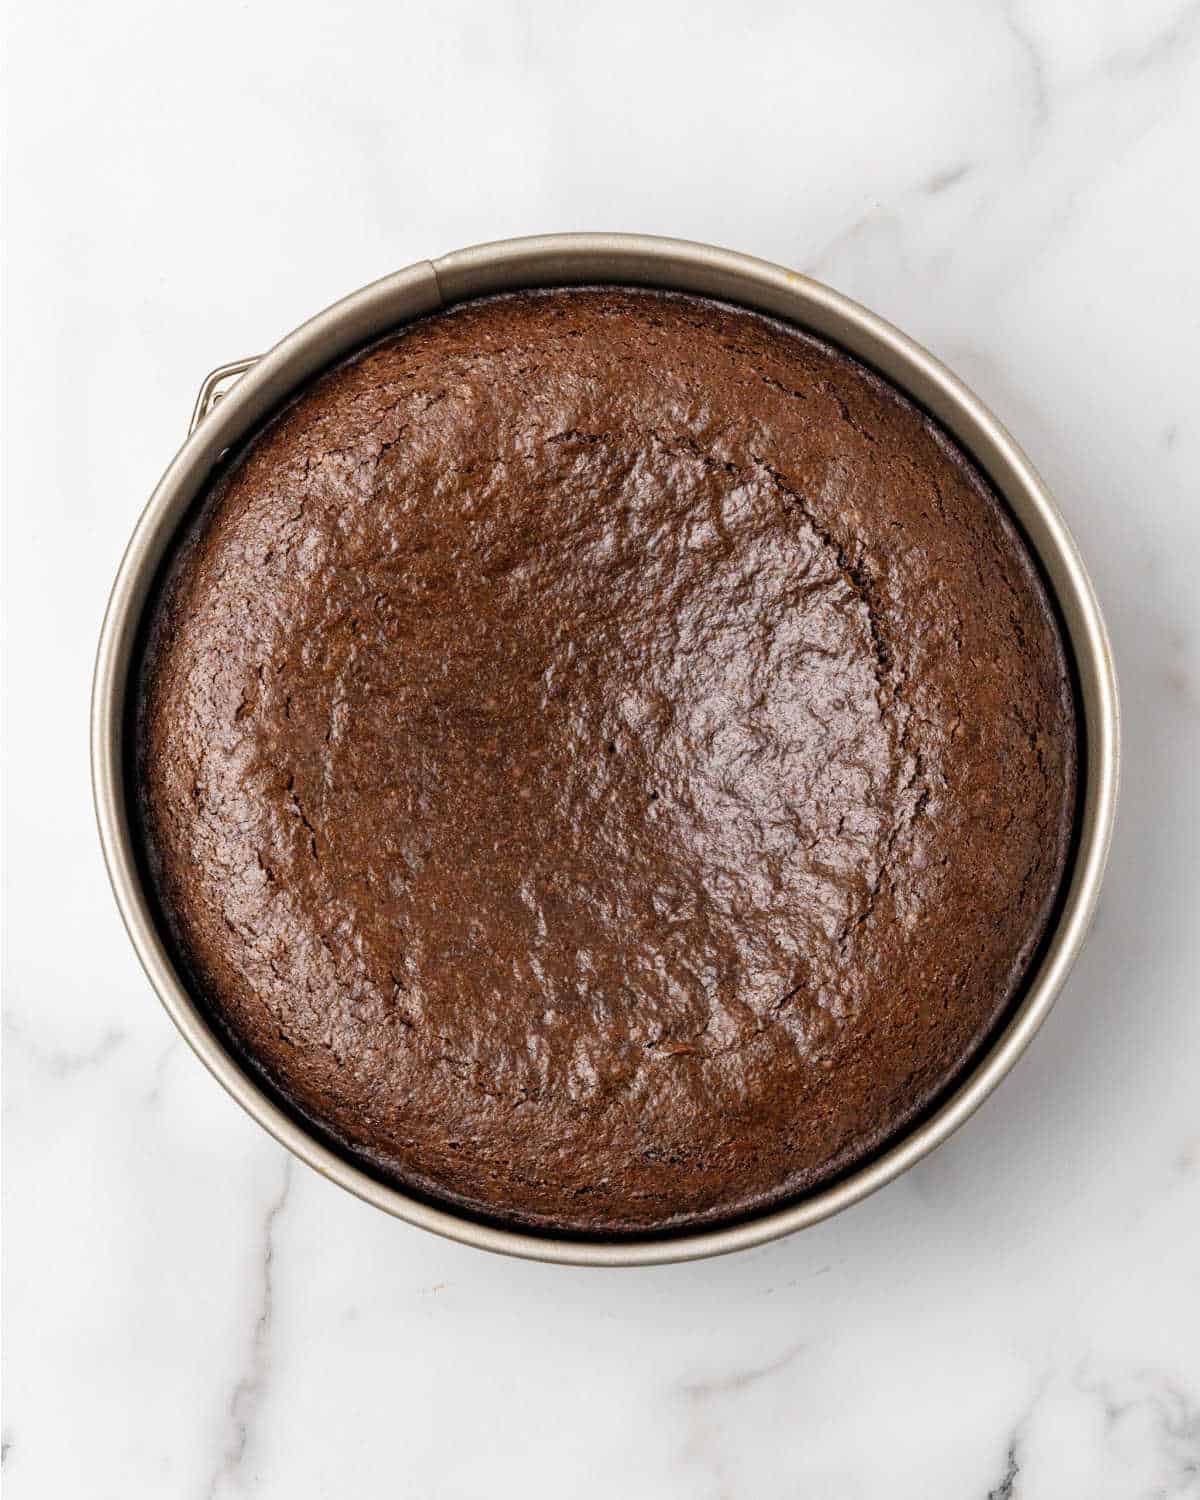 Baked chocolate cake in a metal round pan on a white marble surface.